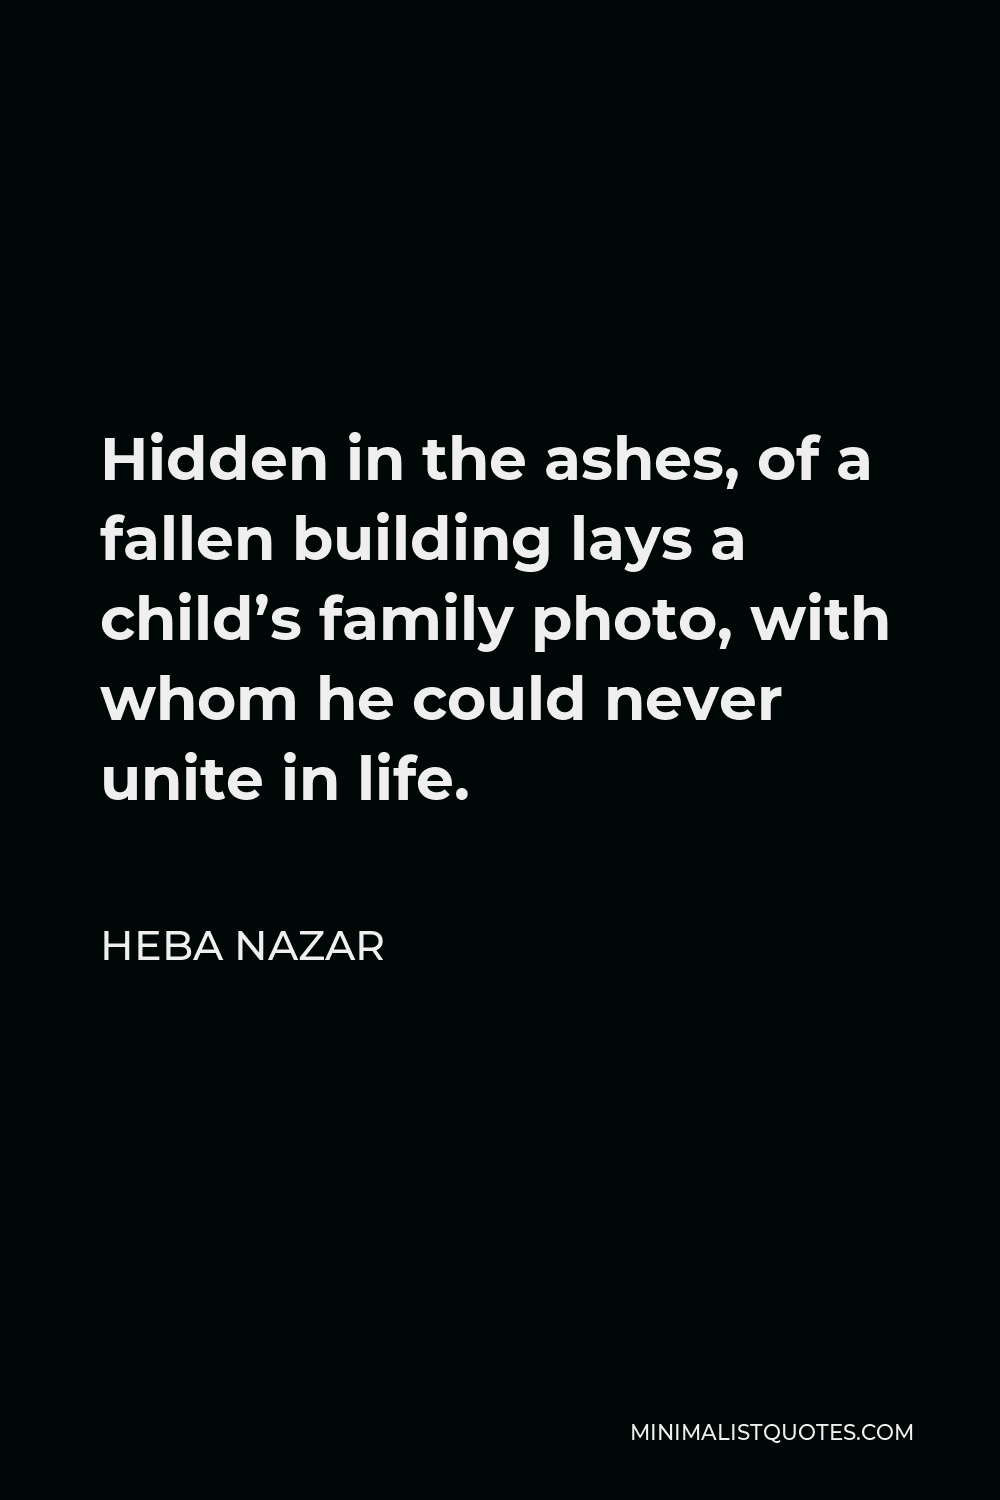 Heba Nazar Quote - Hidden in the ashes, of a fallen building lays a child’s family photo, with whom he could never unite in life.